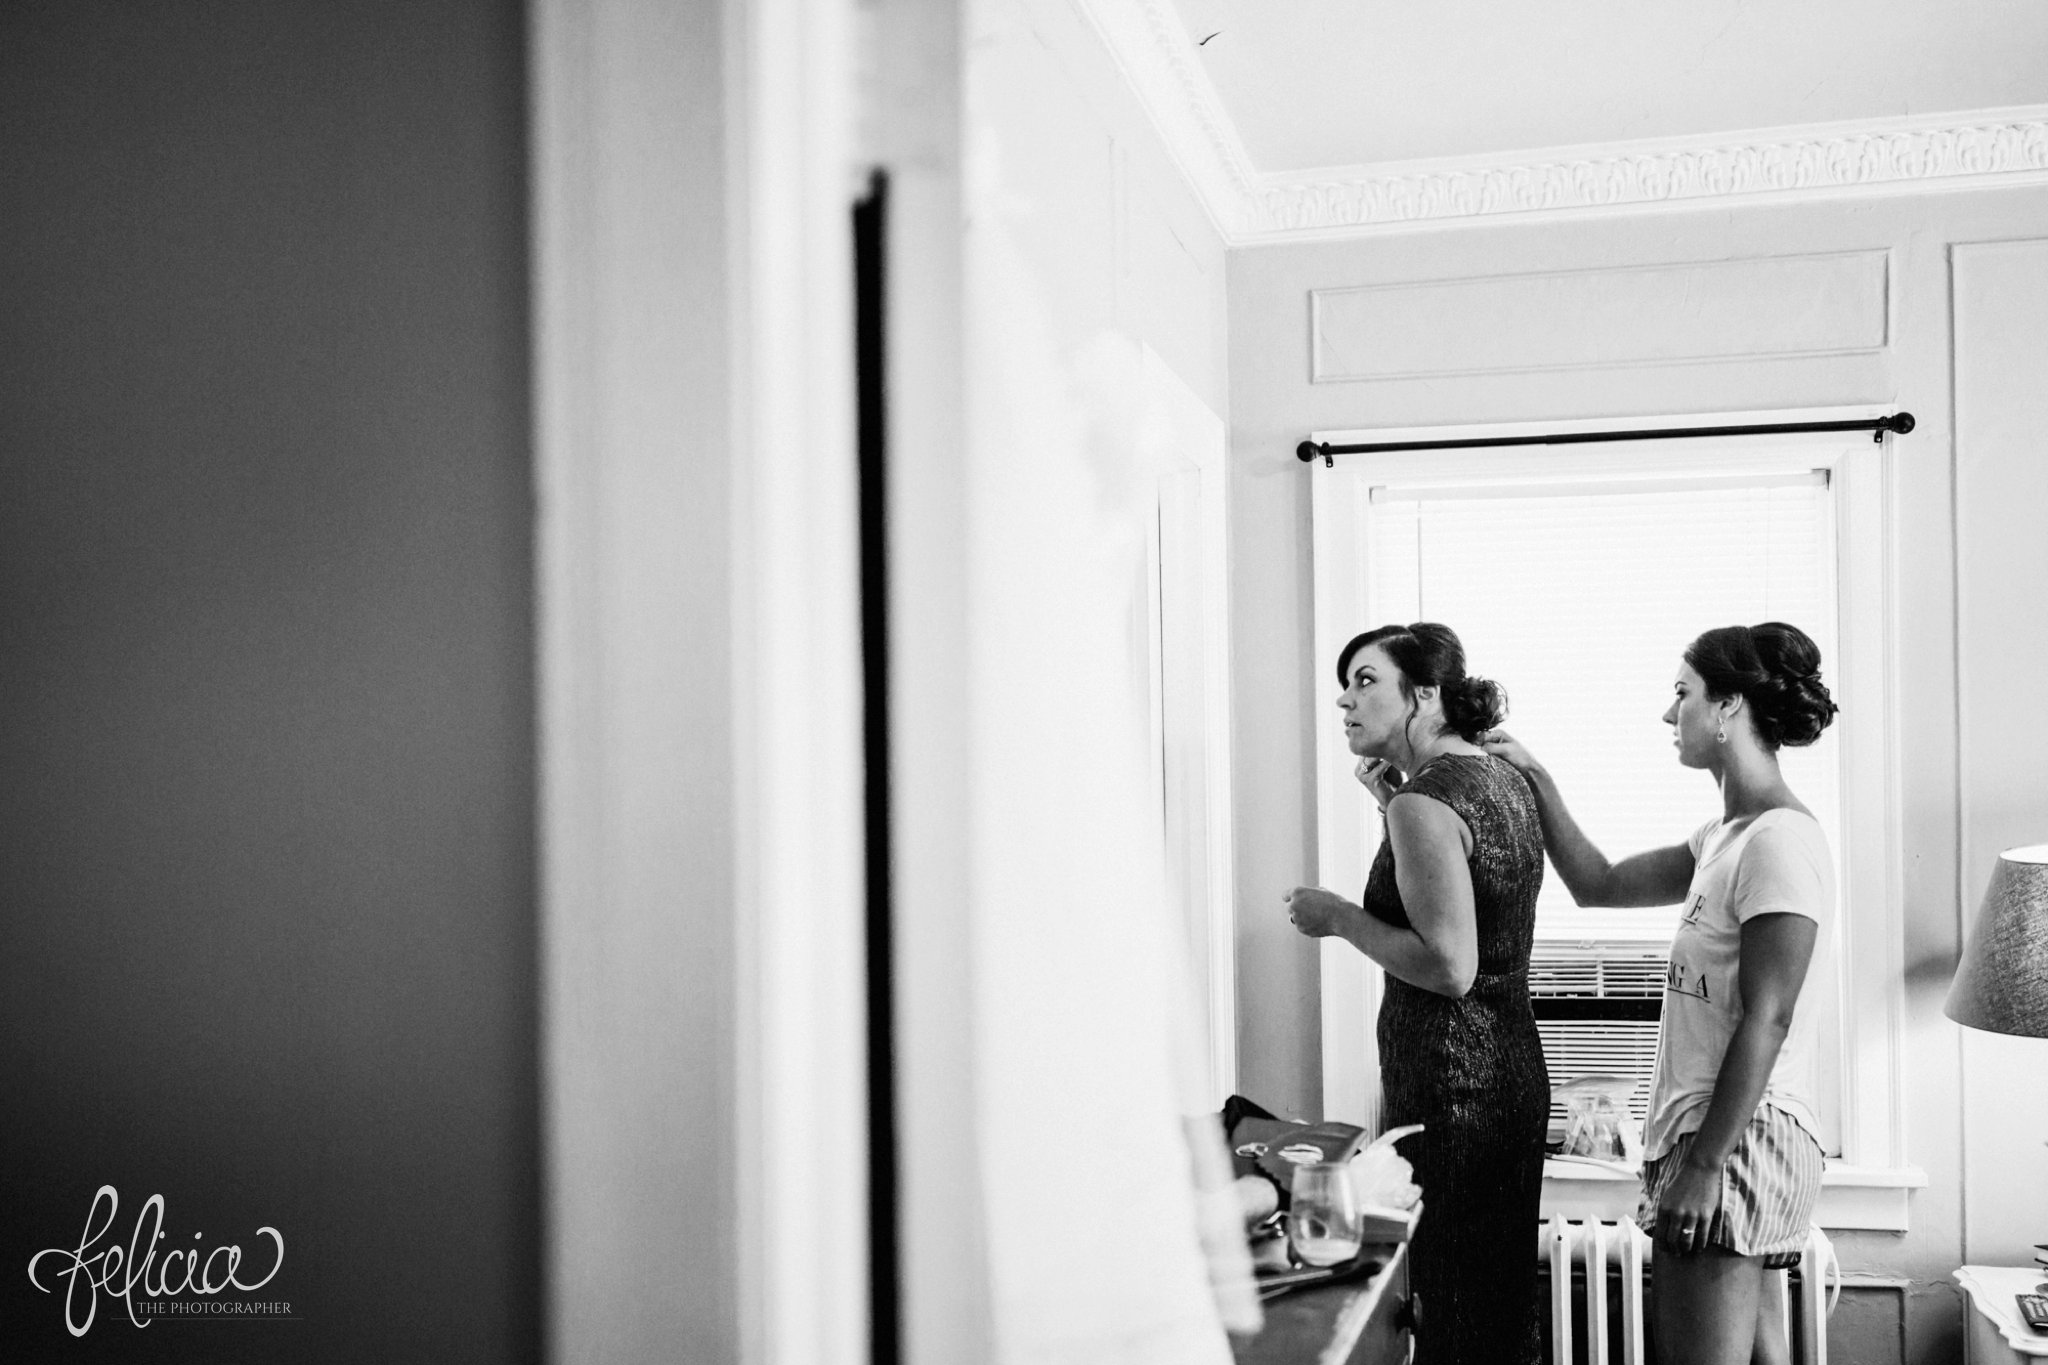 images by feliciathephotographer.com | wedding photographer | kansas city | getting ready | pre-ceremony | details | mother of the bride | black and white | candid | 